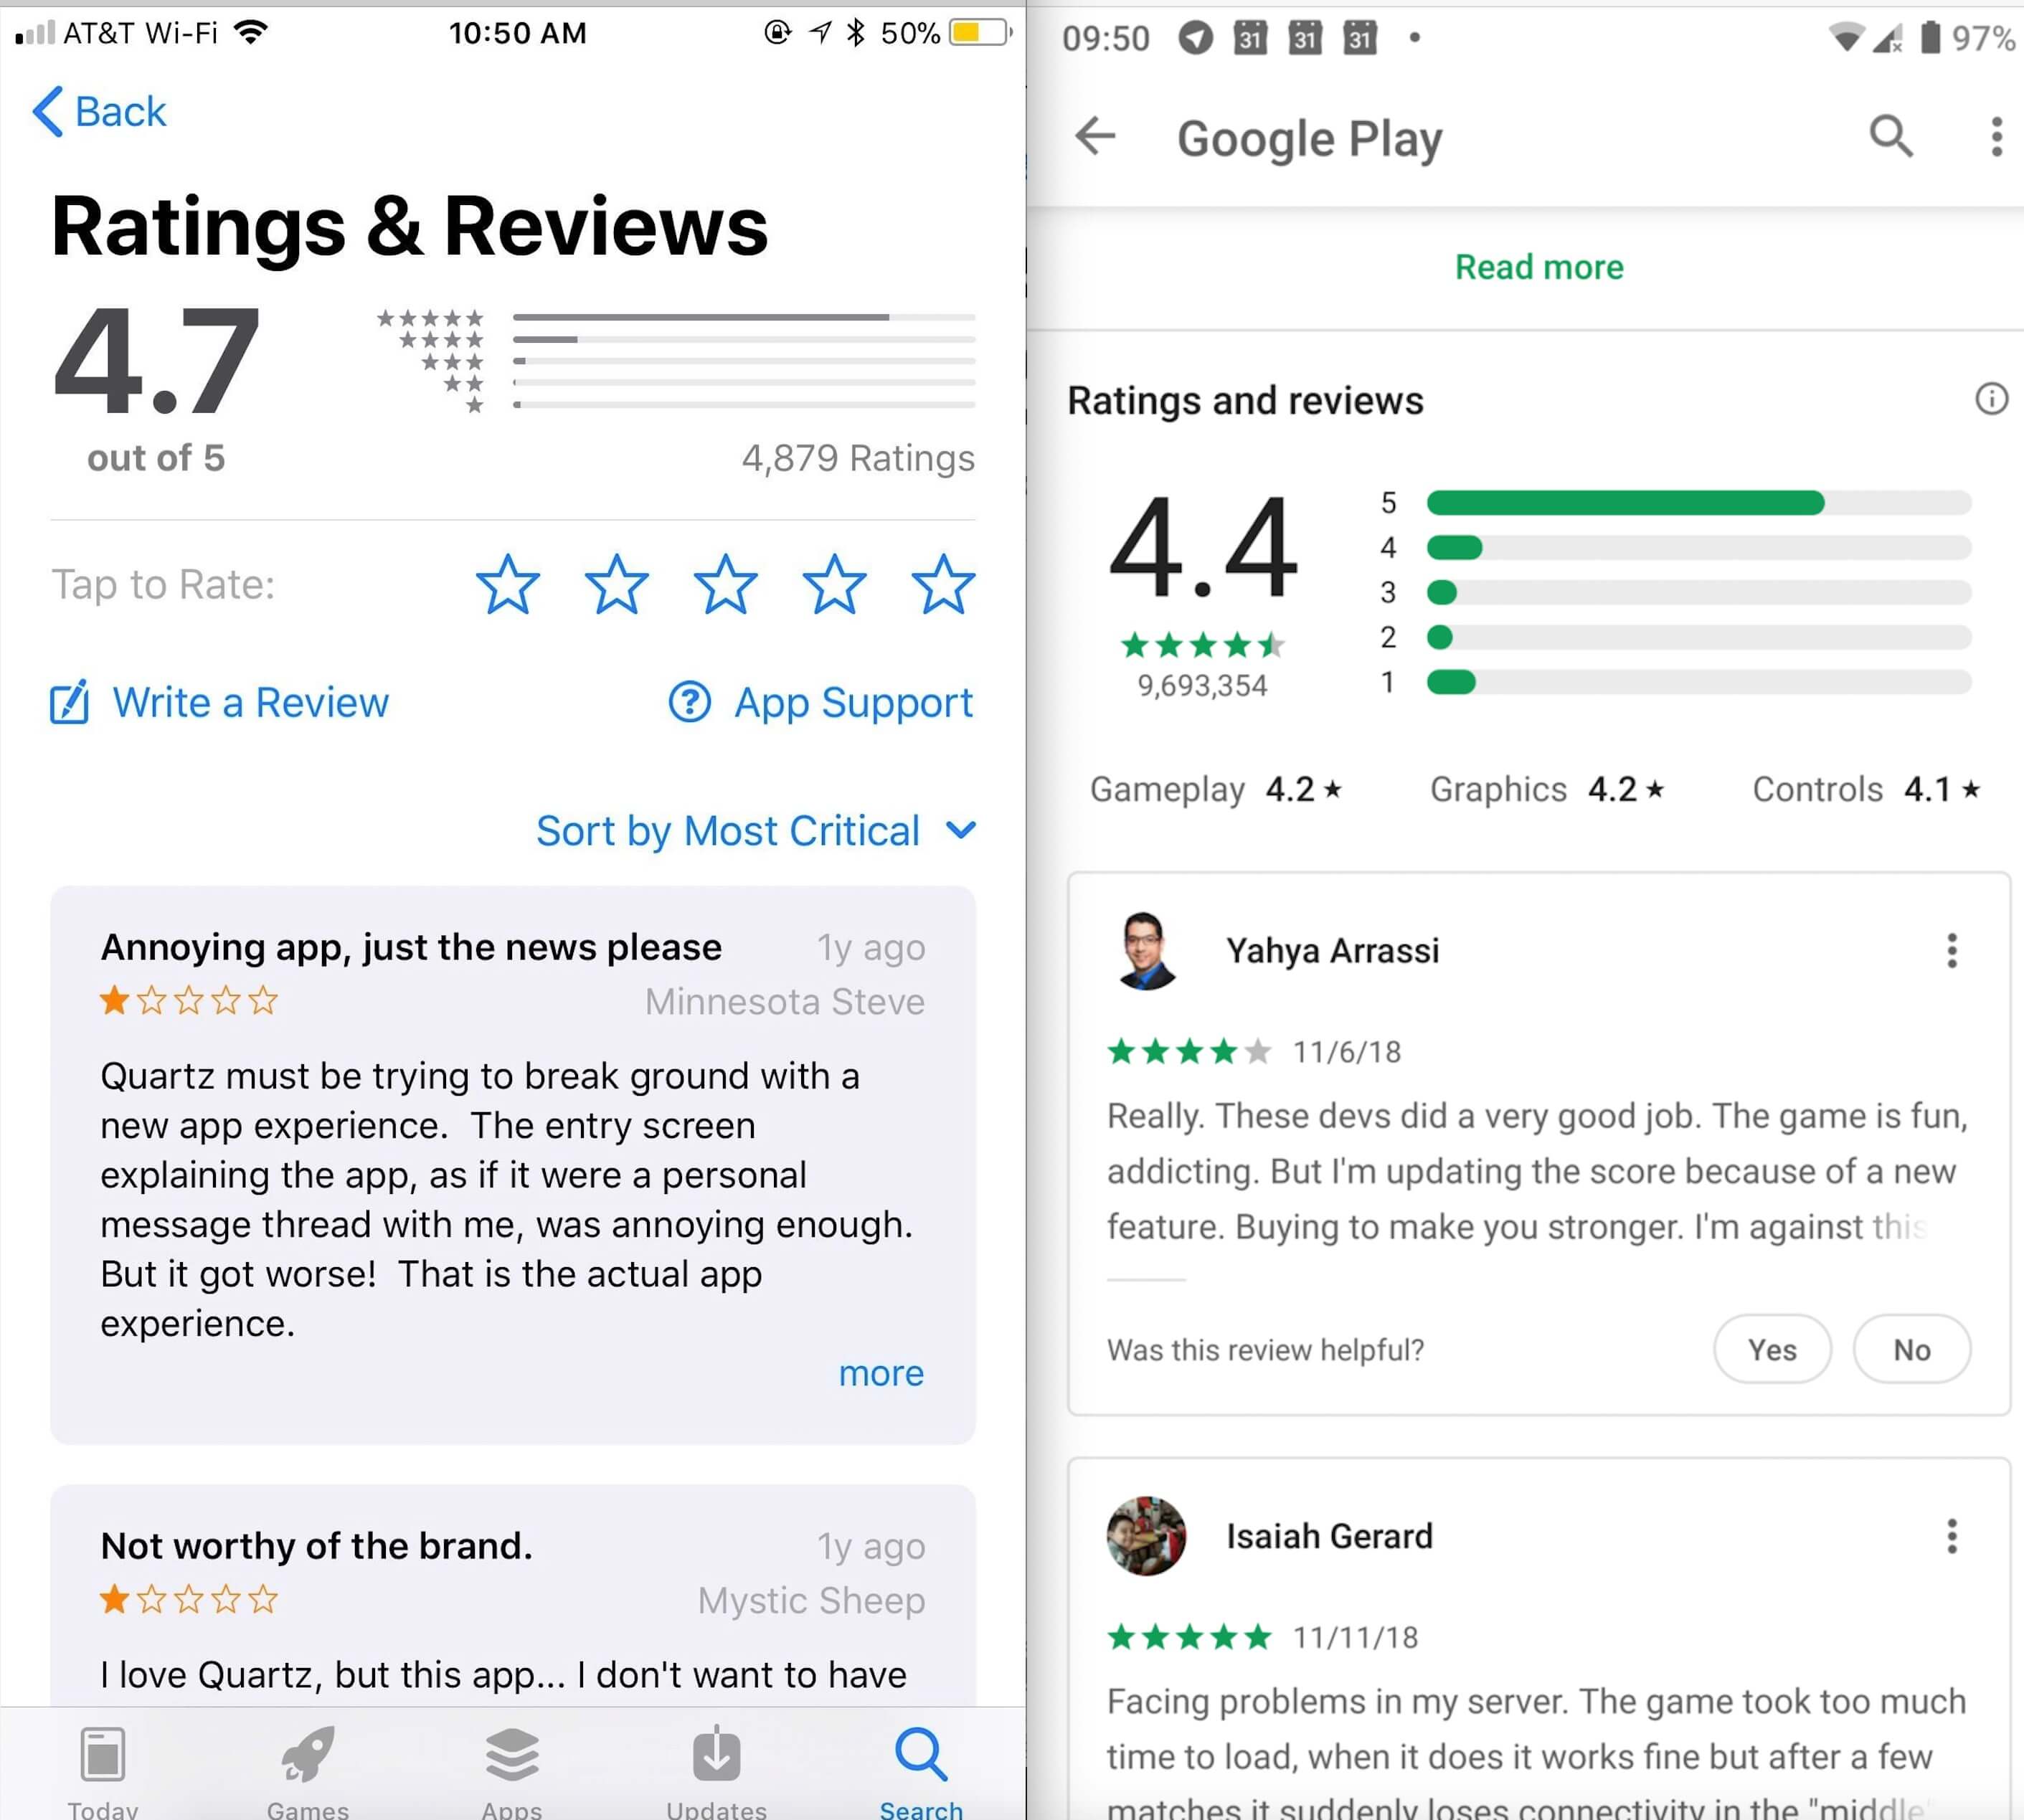 Apple App Store reviews section (left) and the new Google Play reviews section (right)